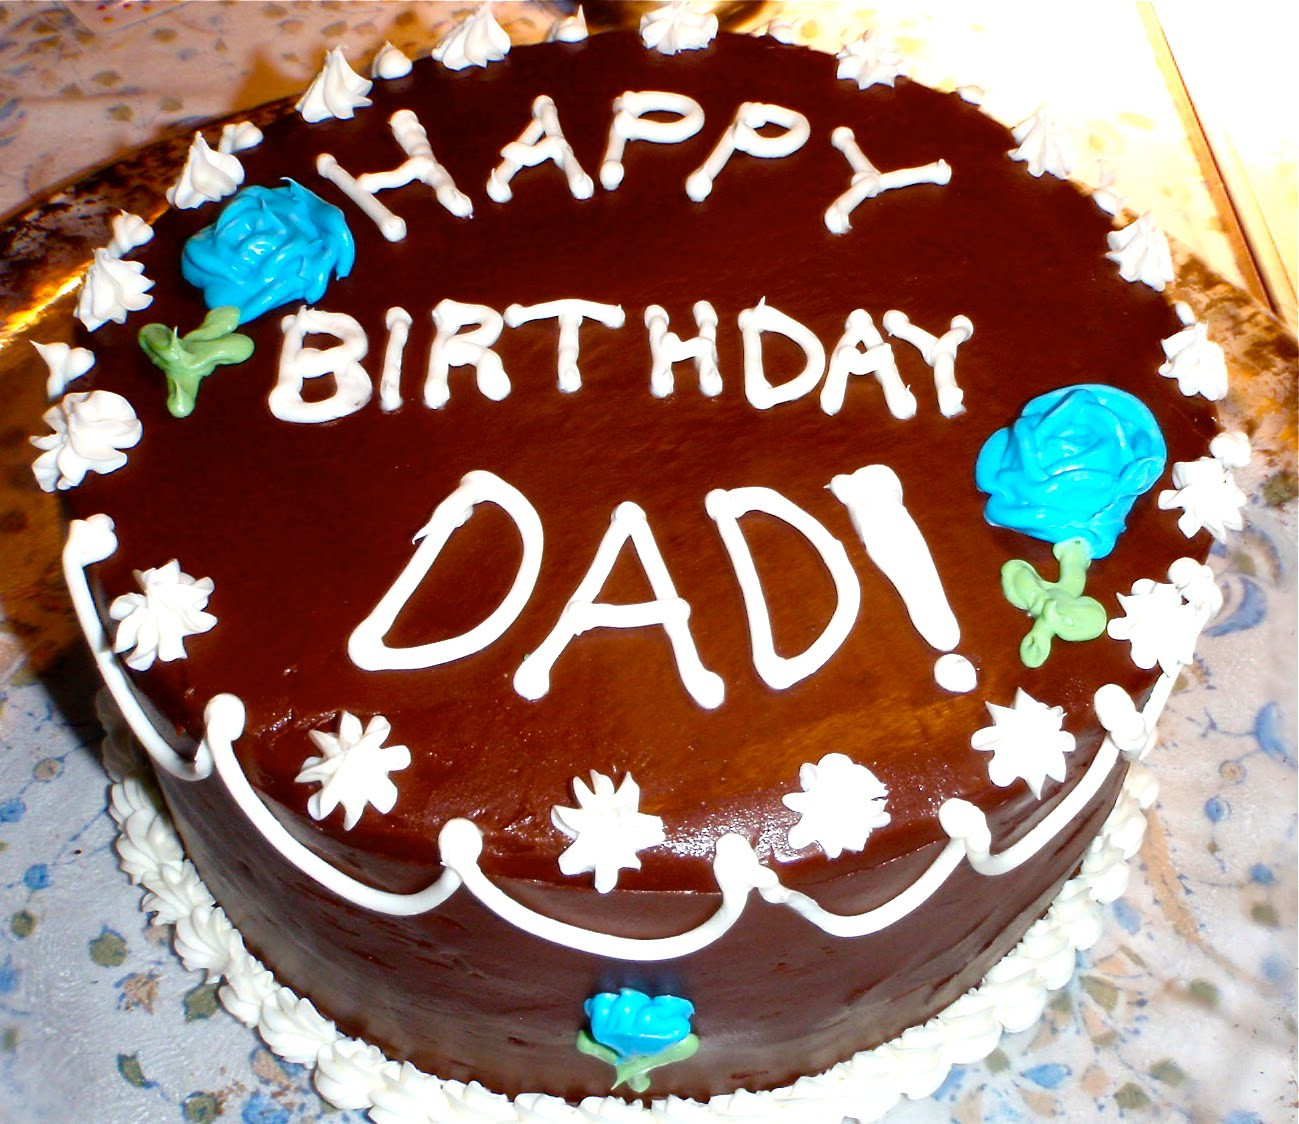 Happy Birthday Dad Cake
 CAKES BY ARIANA AND CORRYN May 2010